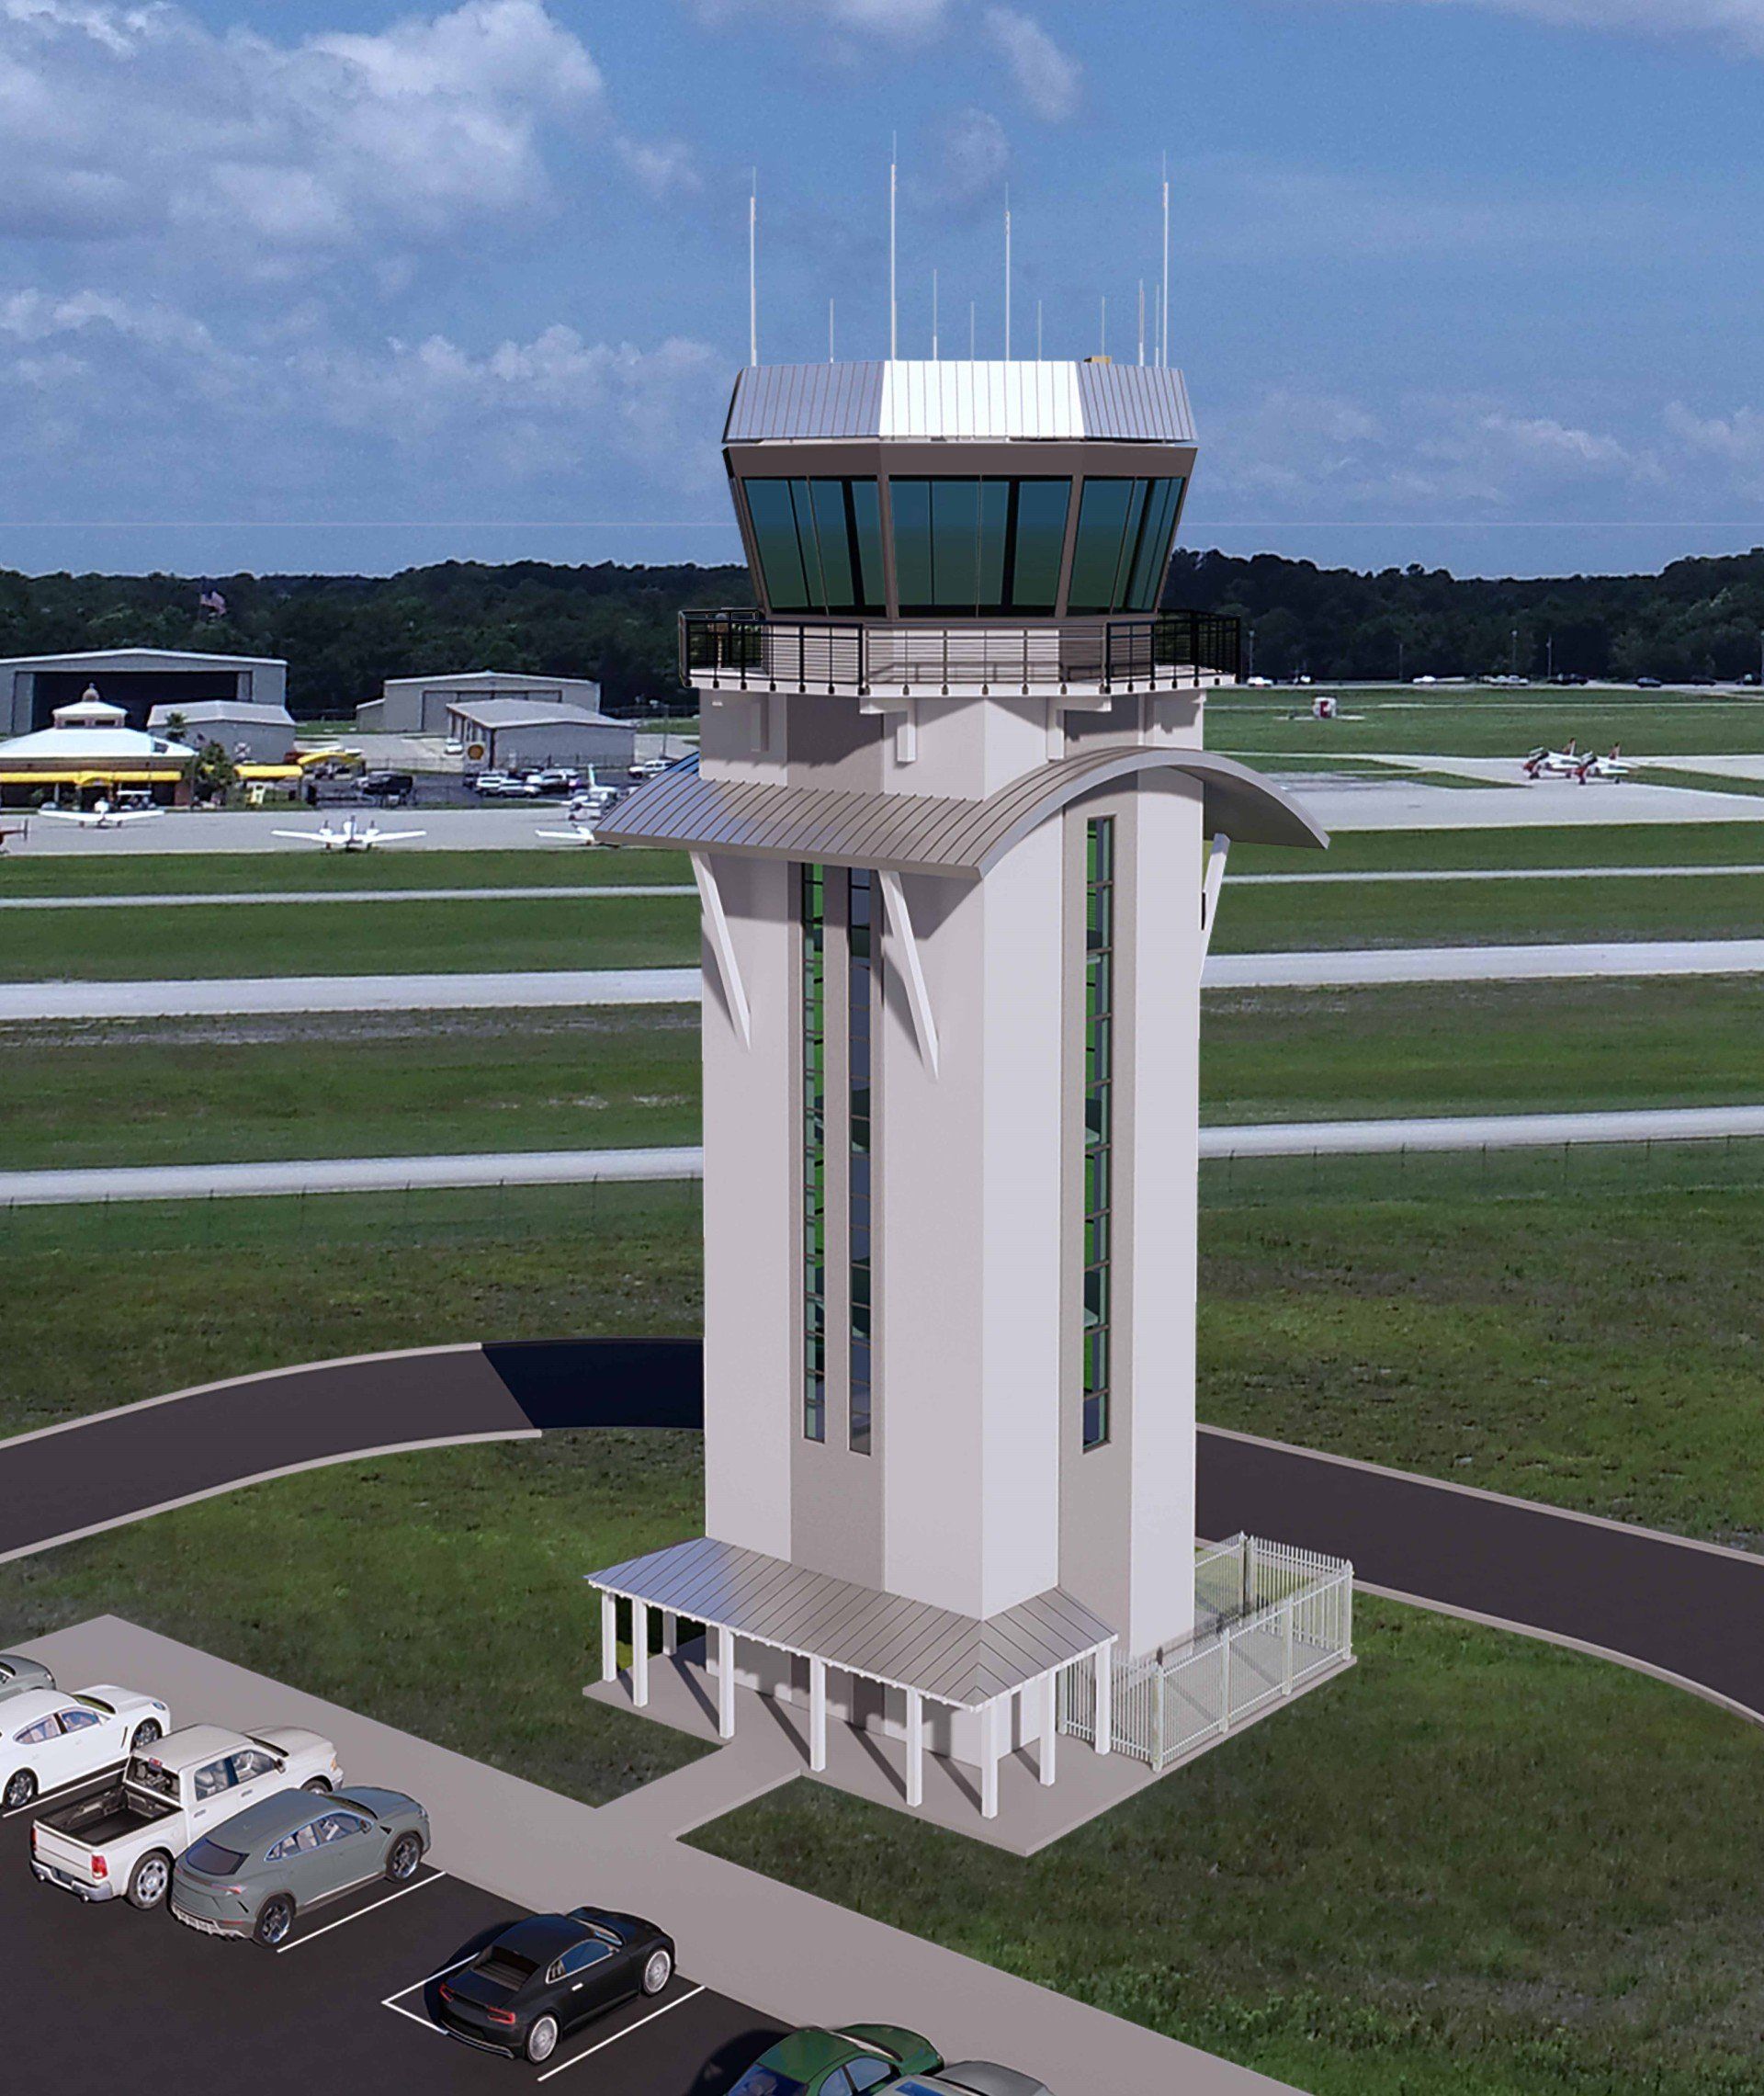 Rendering of the new tower at Jack Edwards Airport in Gulf Shores, Alabama.